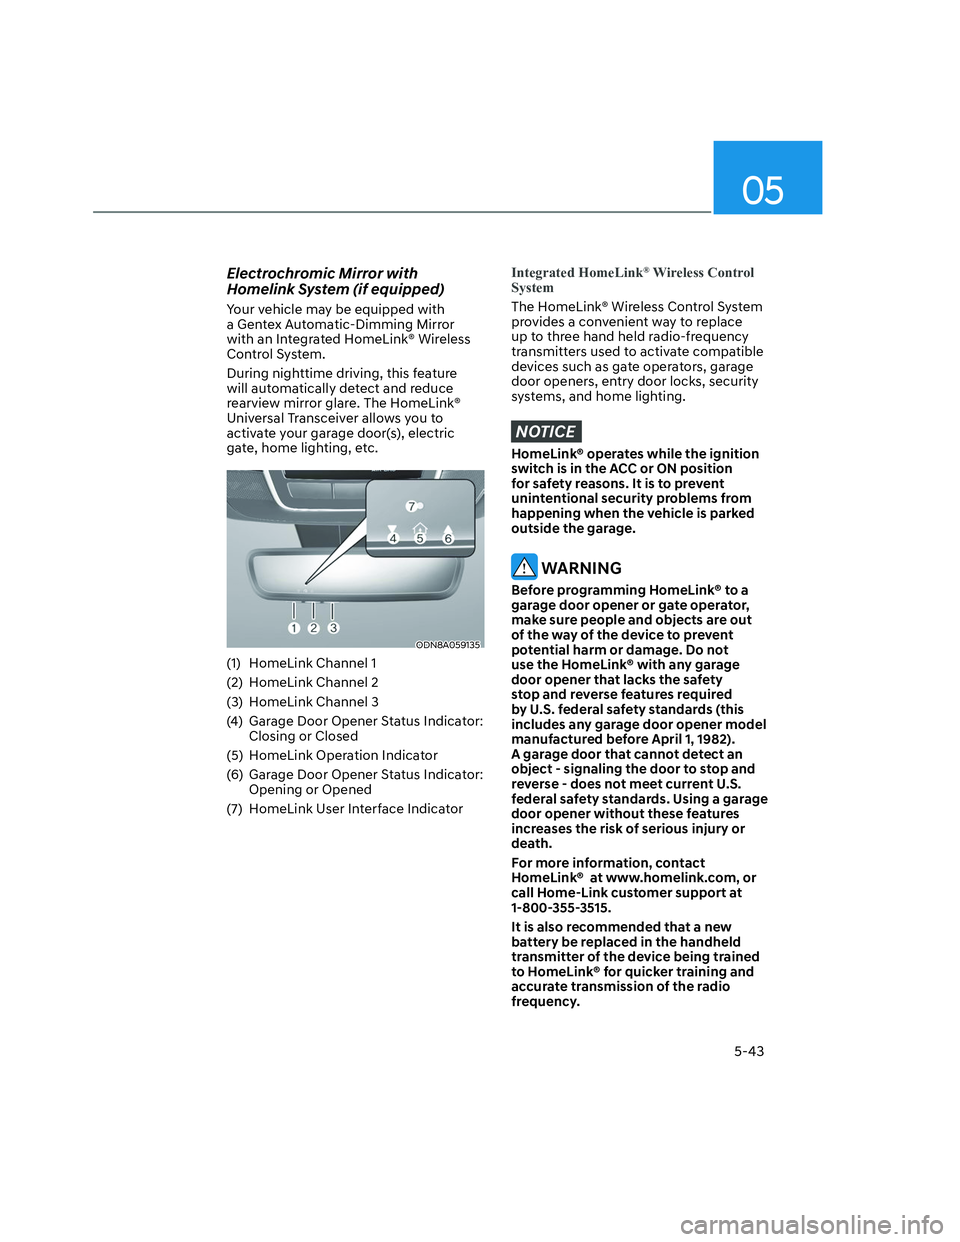 HYUNDAI SANTA CRUZ 2023  Owners Manual 05
5-43
Electrochromic Mirror with 
Homelink System (if equipped)
Your vehicle may be equipped with 
a Gentex Automatic-Dimming Mirror 
with an Integrated HomeLink® Wireless 
Control System.
During n